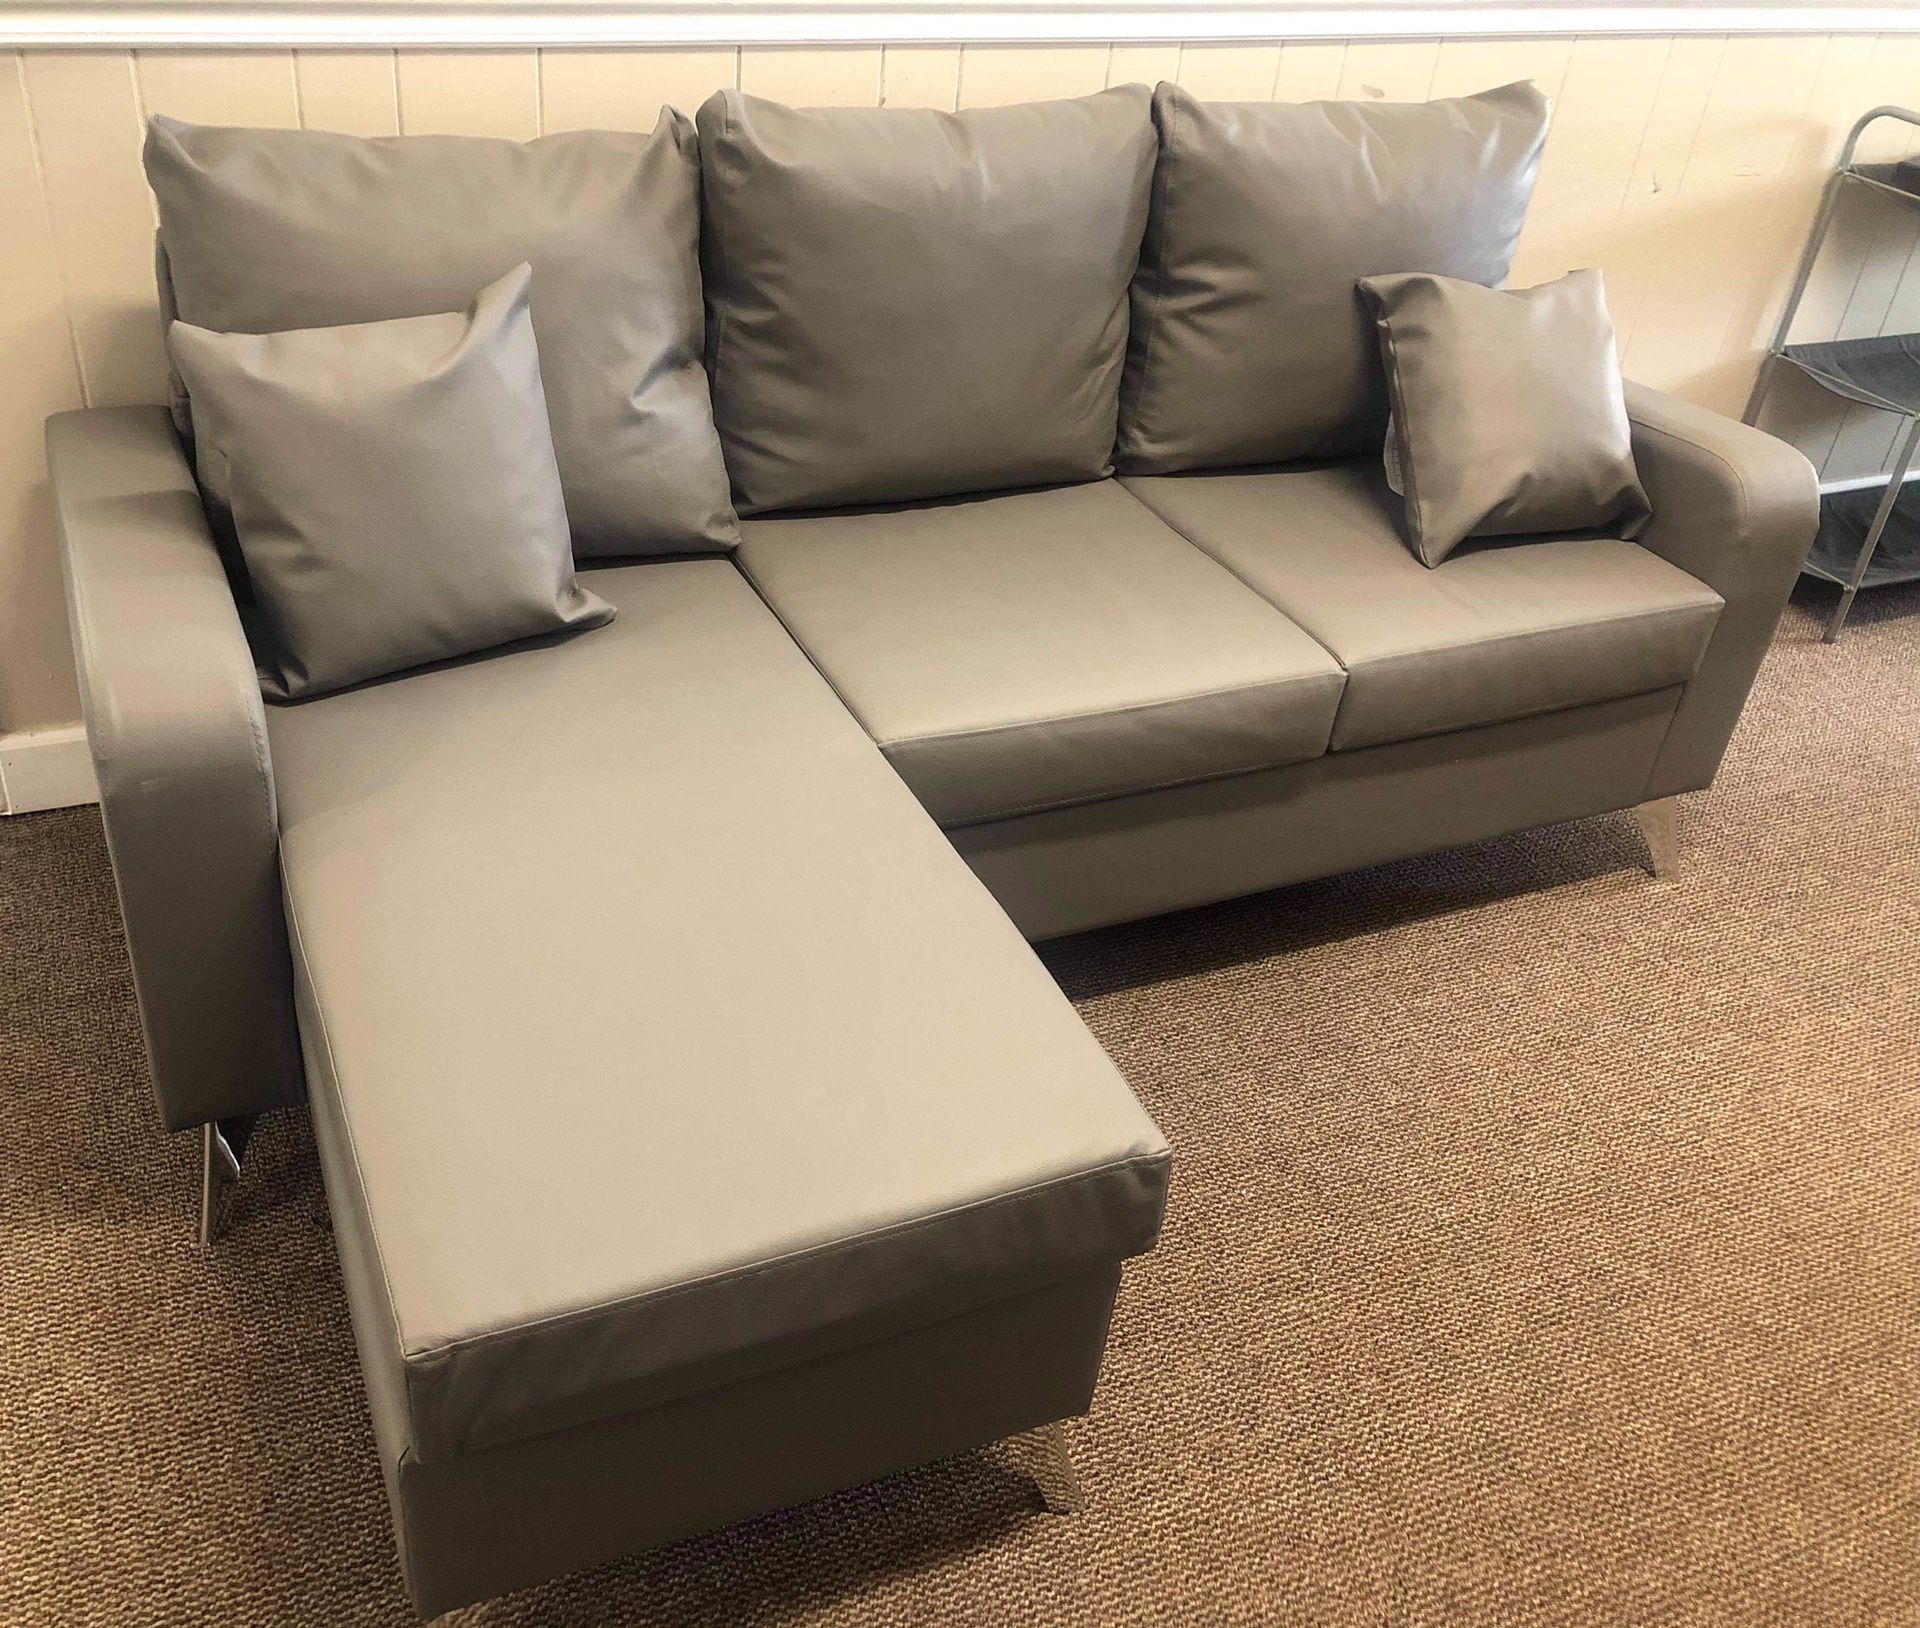 NICE!! SMALL GREY LEATHER SECTIONAL!! (PERFECT FOR KIDS ROOM OR OFFICE!!)